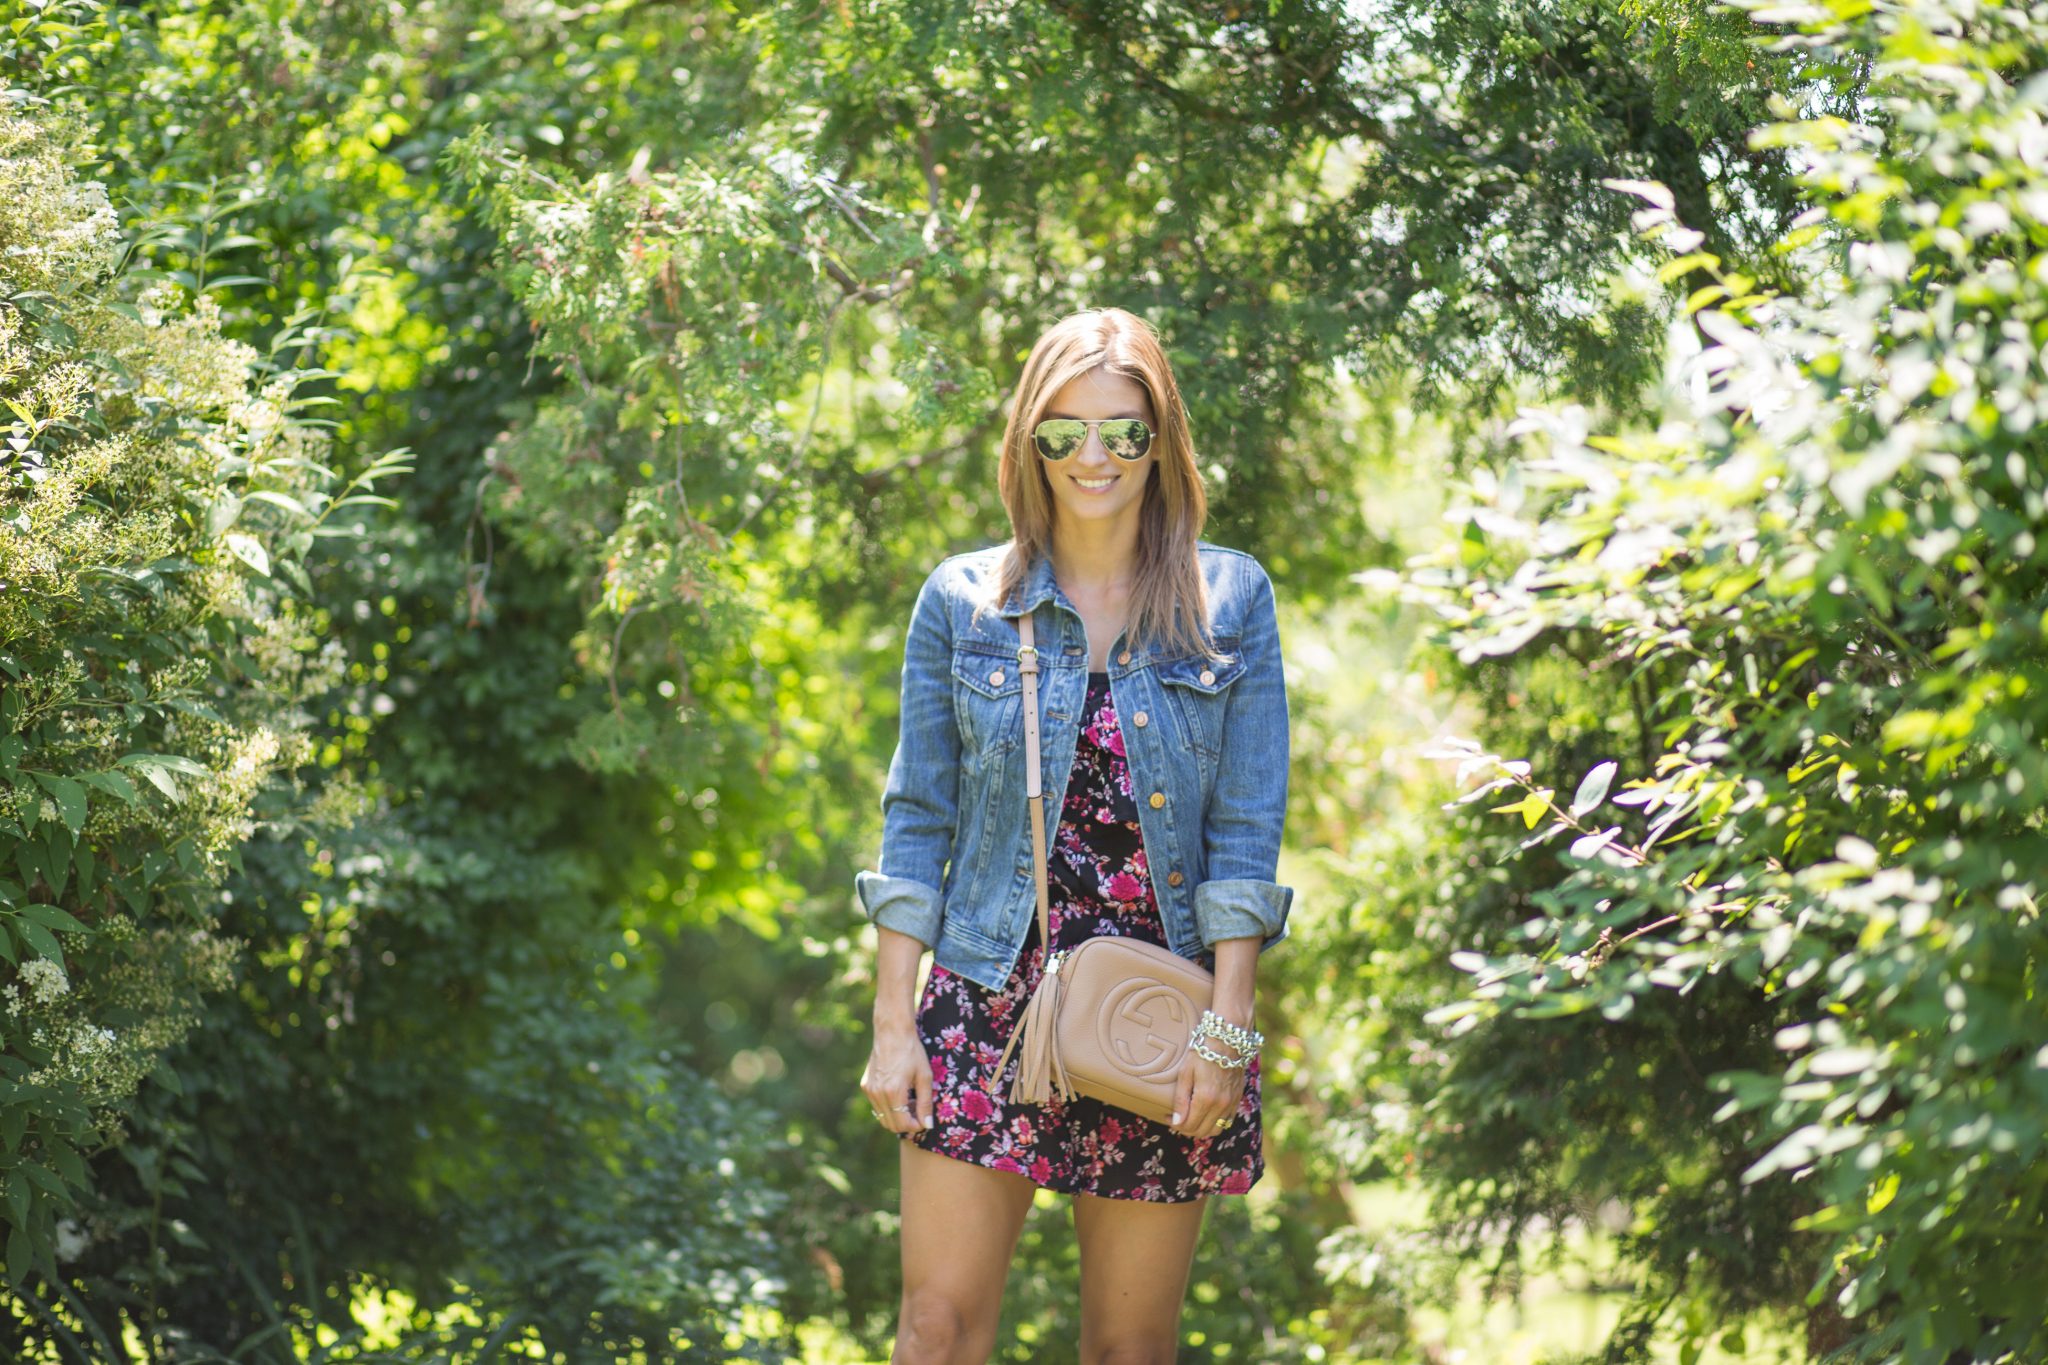 Floral romper from Du North Designs, J.Crew Jean jacket, ray-ban aviators, Gucci bag, le chateau wedges sparkleshinylove